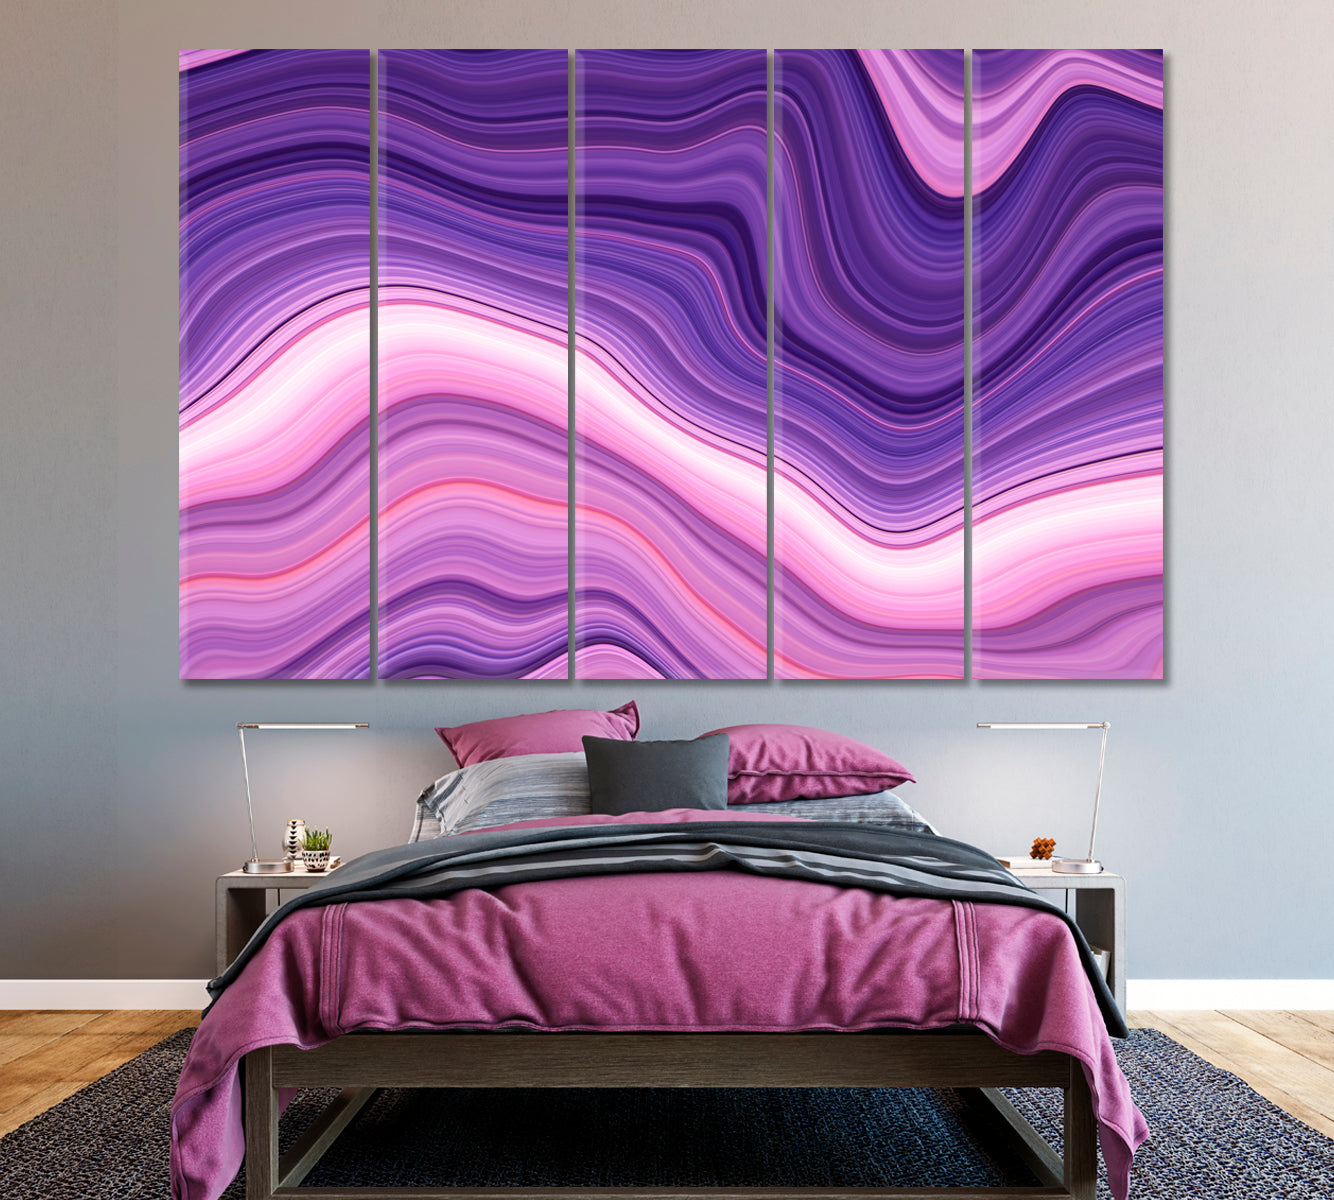 Purple Marble Wavy Pattern Canvas Print ArtLexy 5 Panels 36"x24" inches 